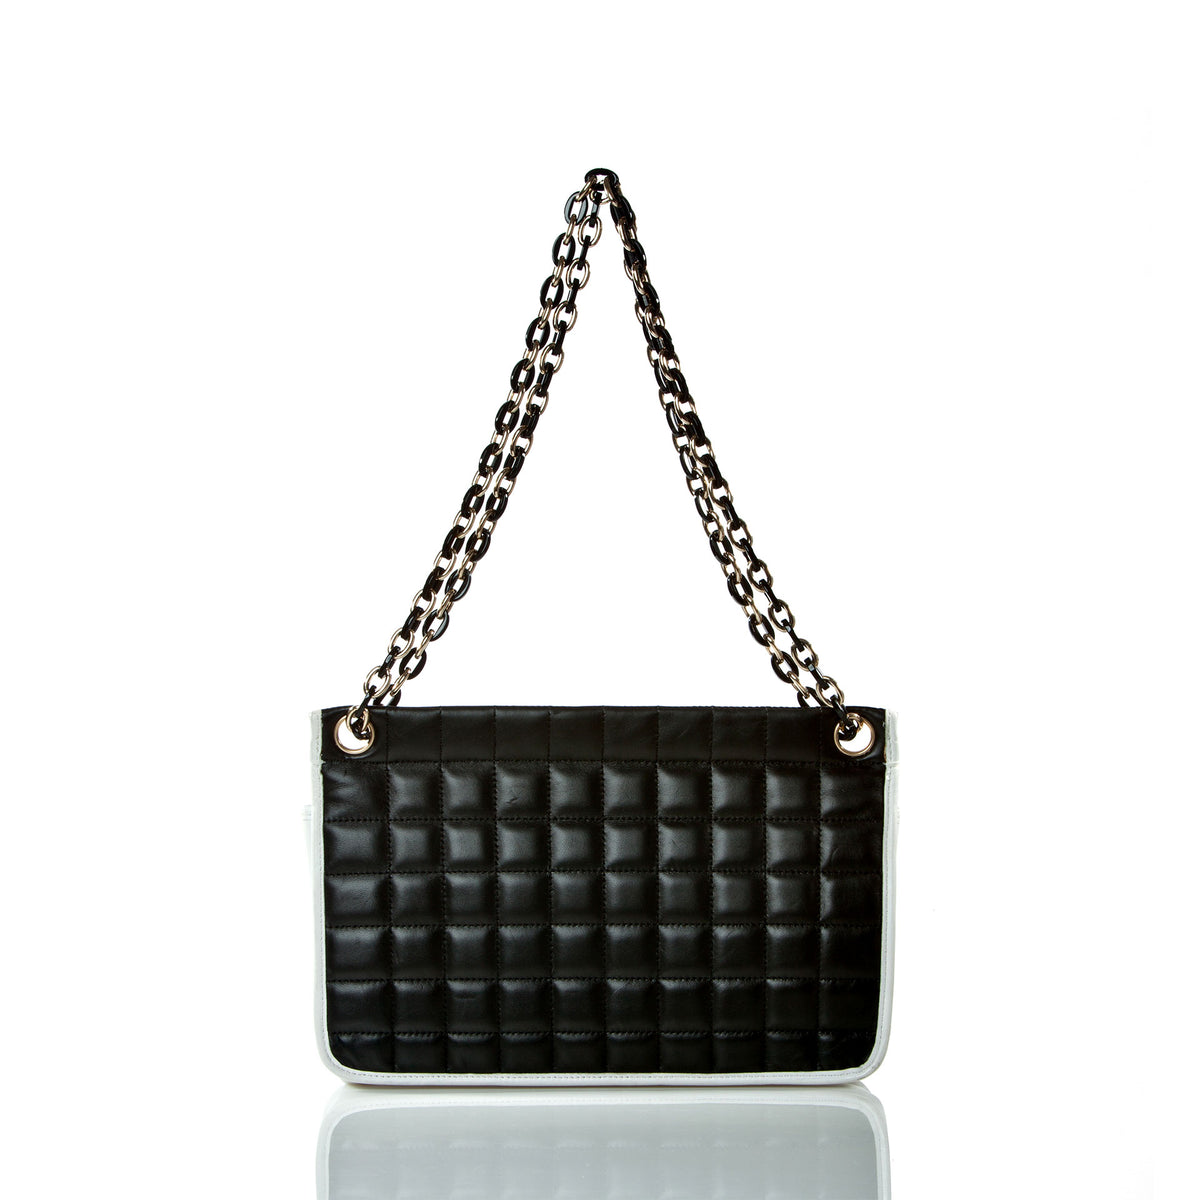 Chanel Two Tone Black and White Mademoiselle Flap Bag – House 